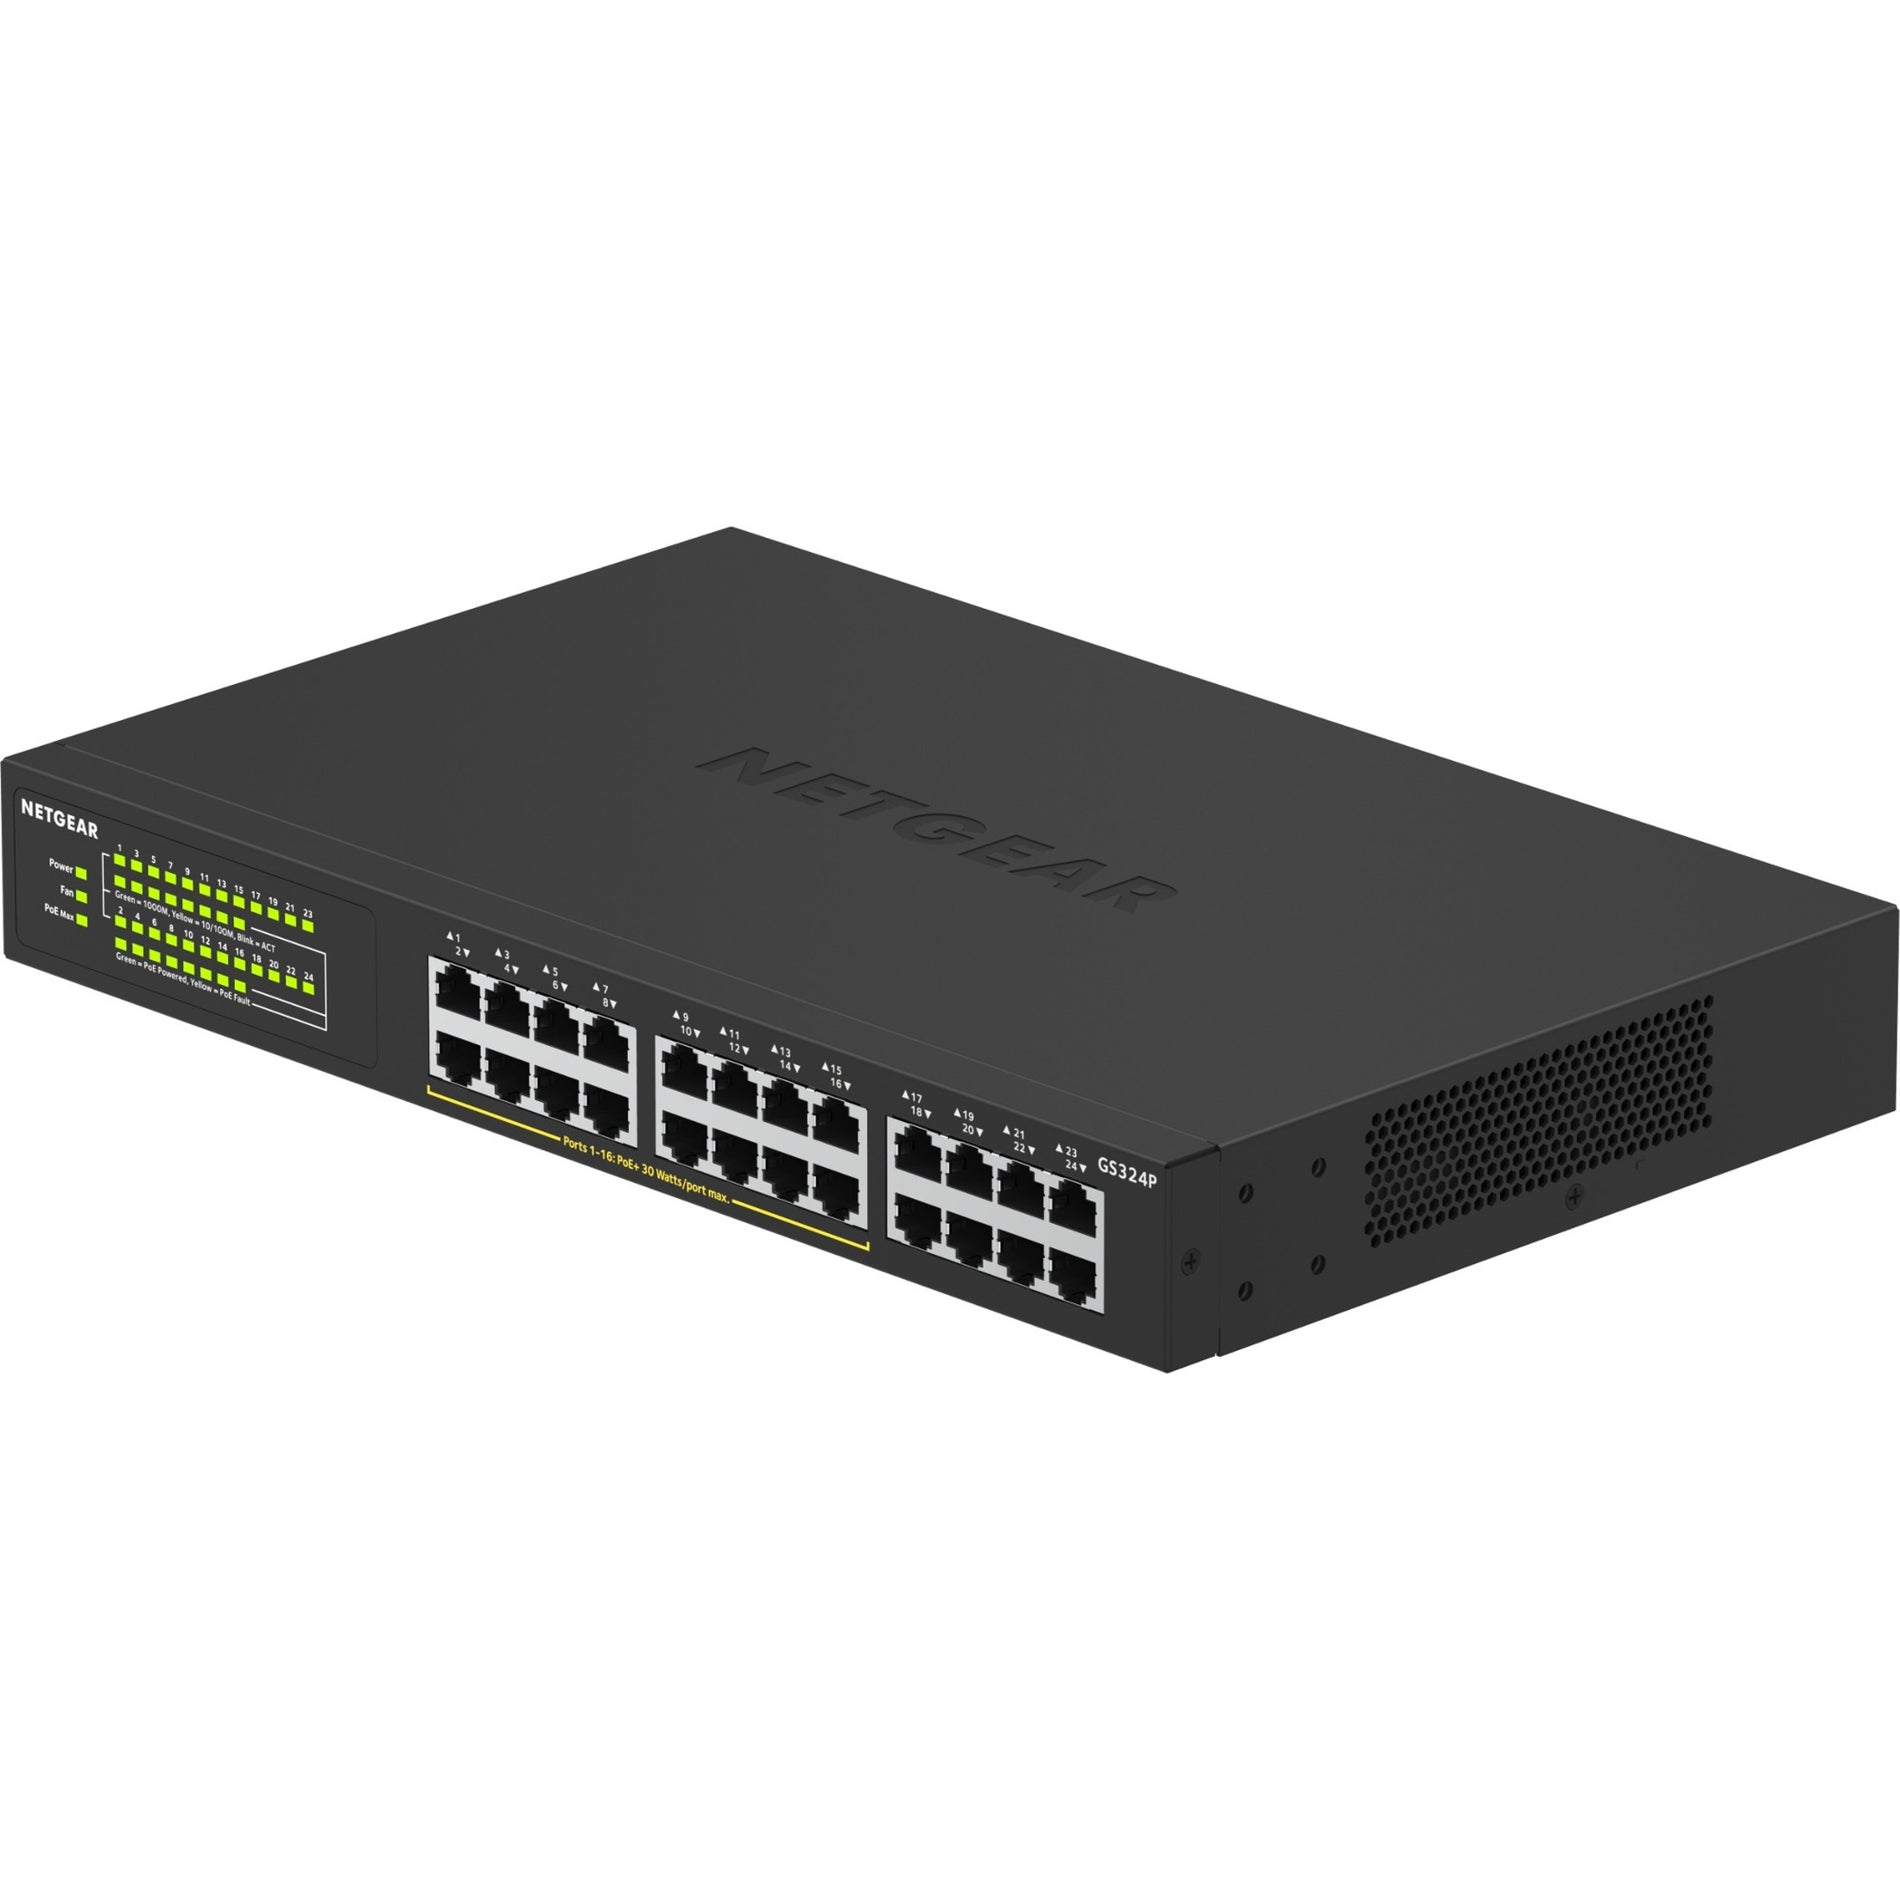 Netgear GS324P-100NAS GS324P Ethernet Switch, 24 Port Gigabit Network, Power Supply Included